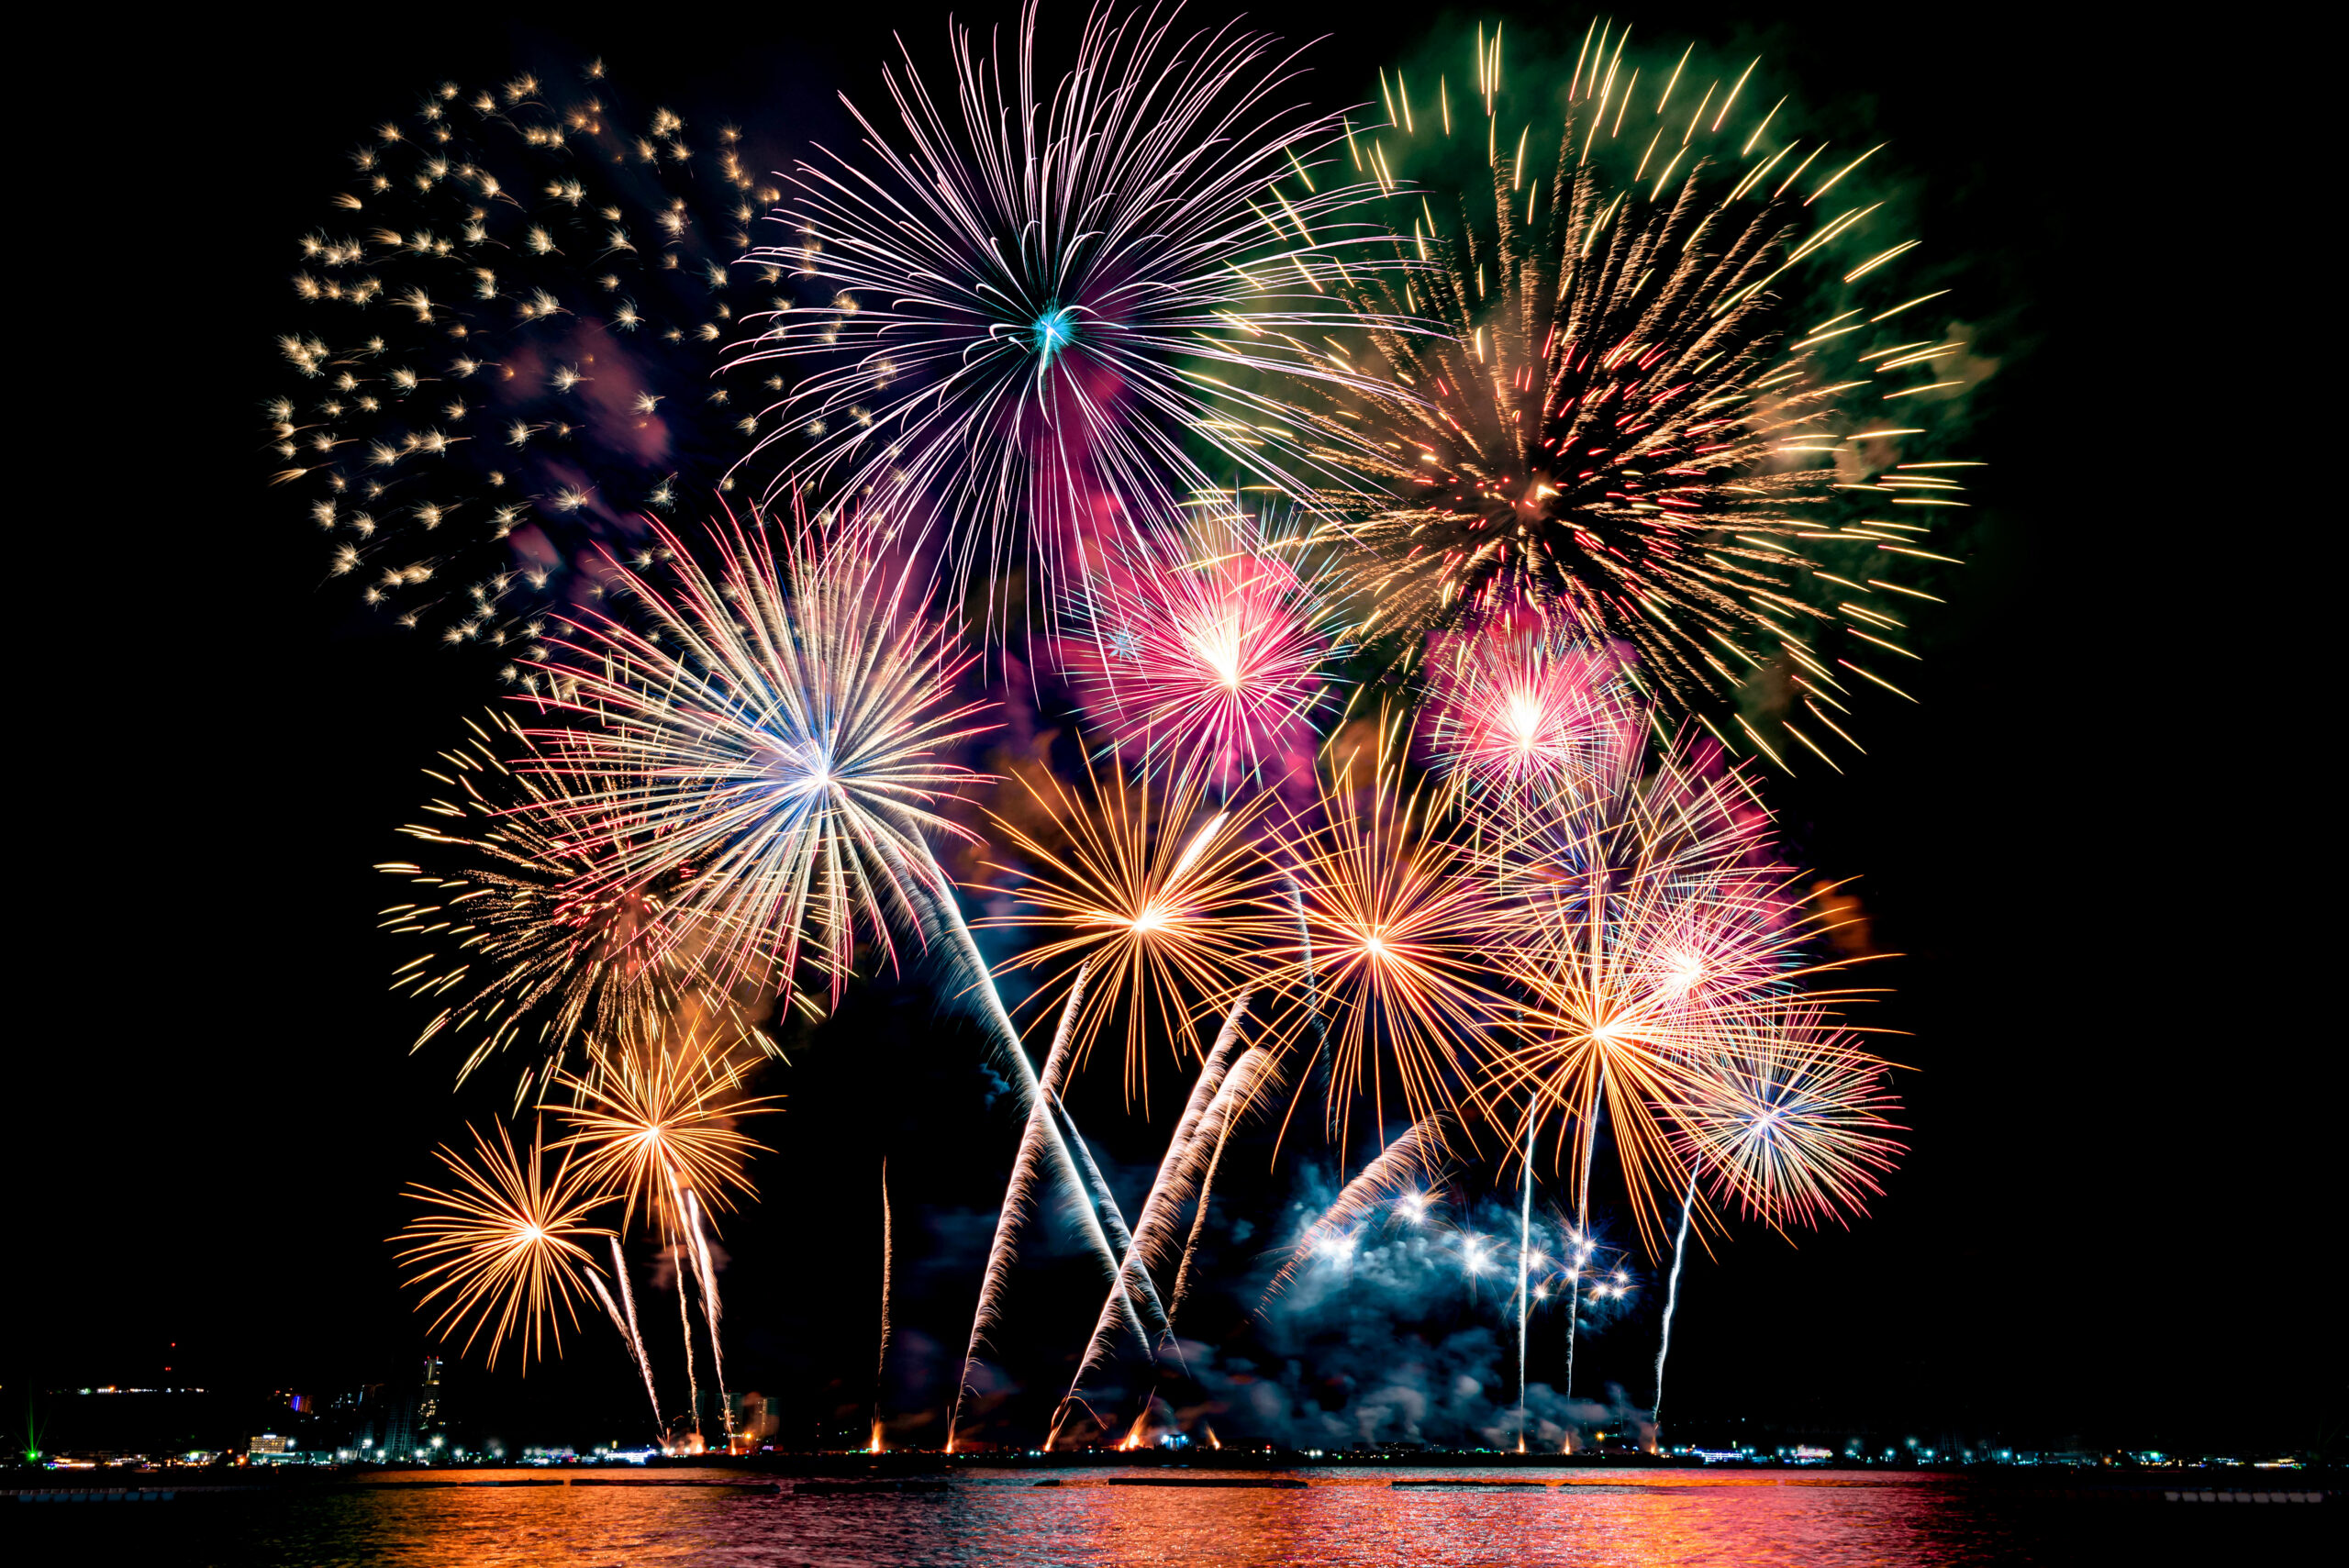 Beautiful colorful fireworks display on 4th of July, with multi color reflection on the water